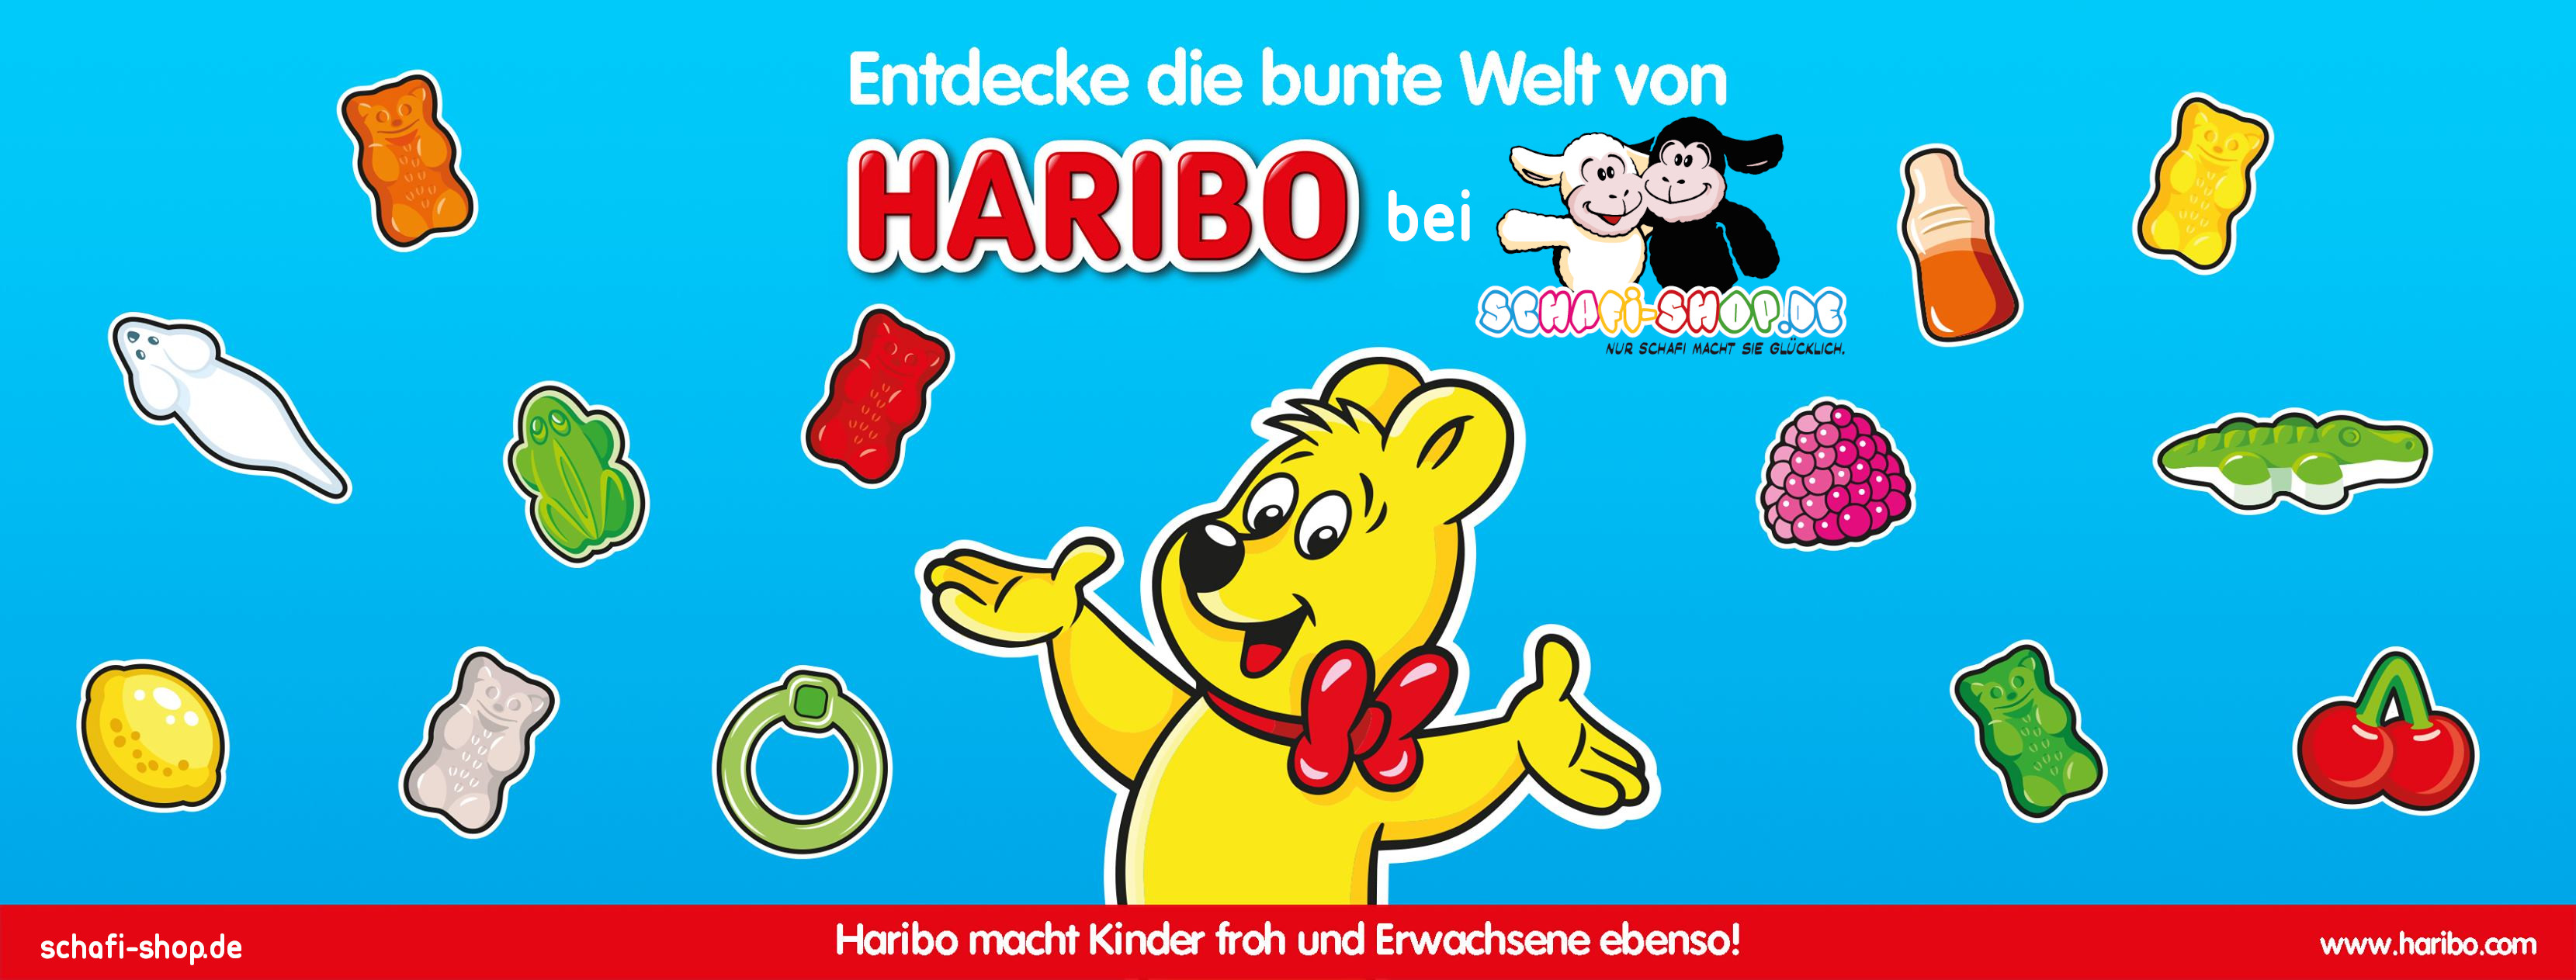 Discover the colorful world of Haribo at Schafi-Shop.de